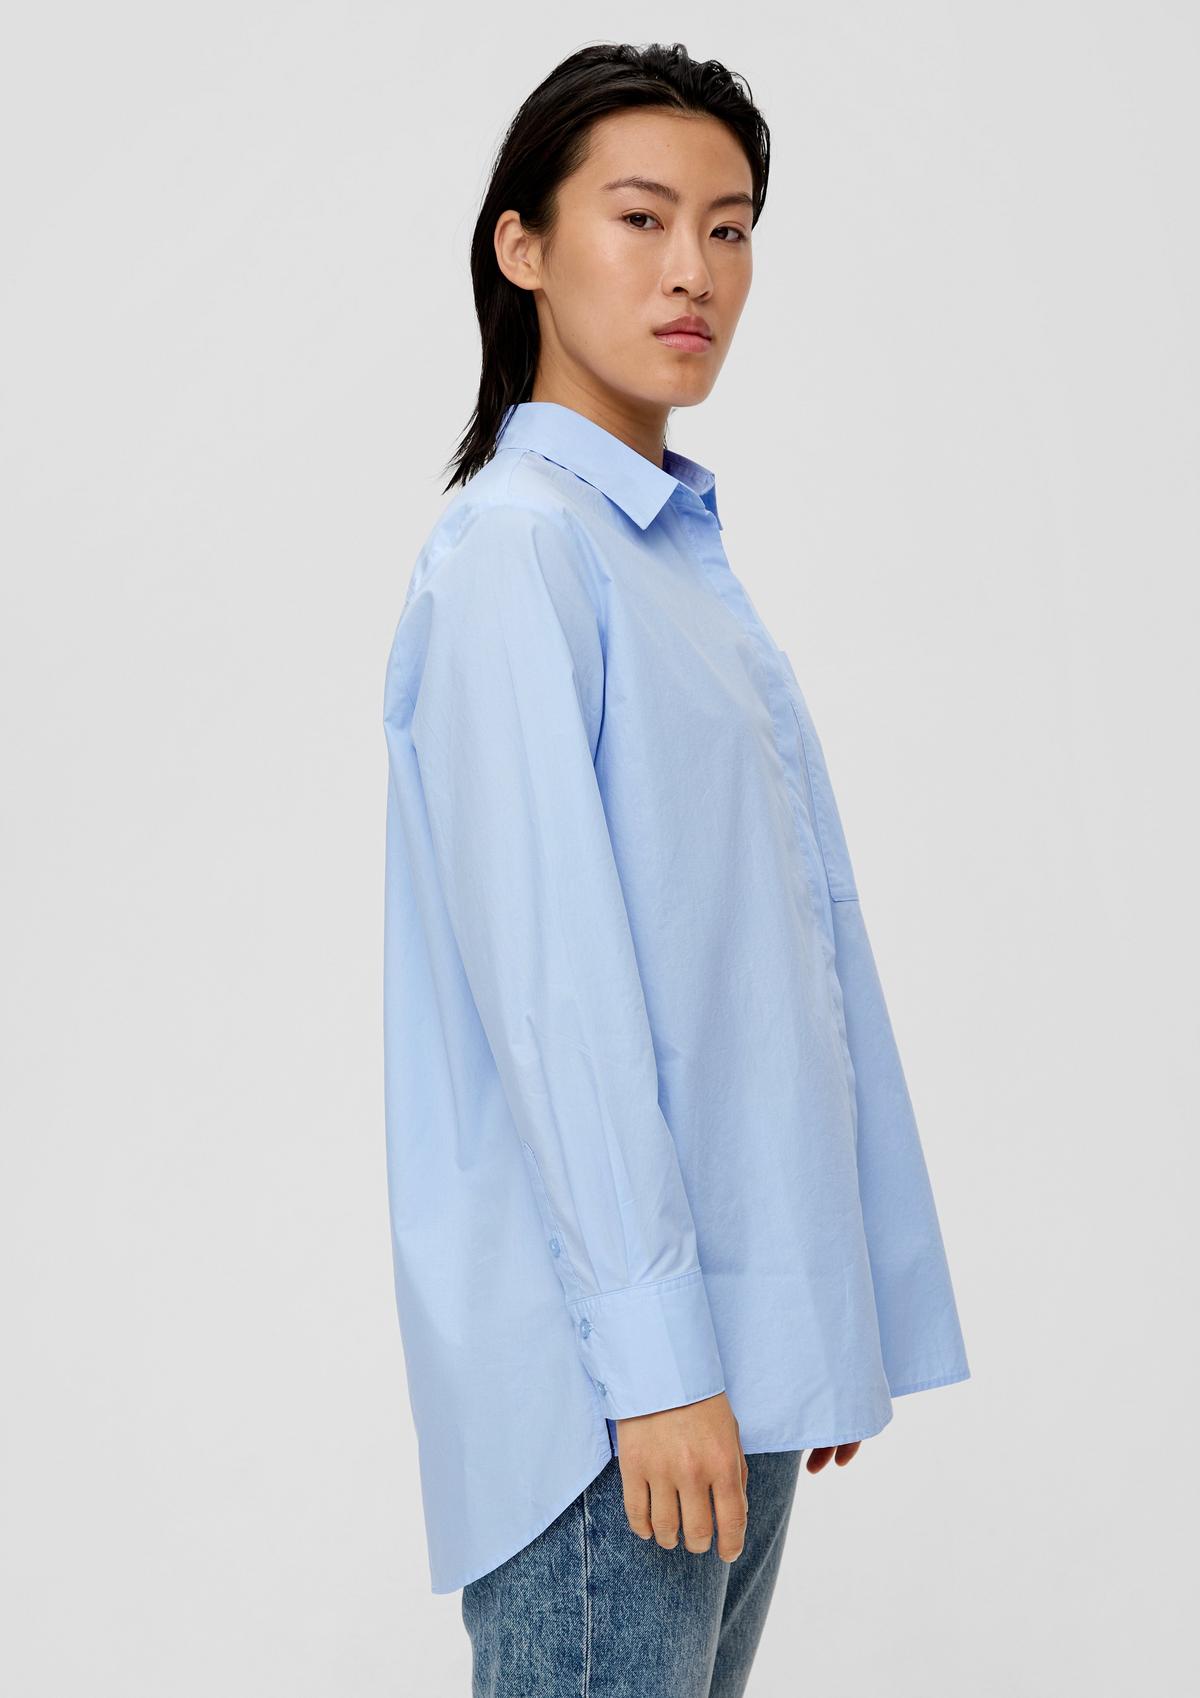 Cotton blouse with an elongated back hem